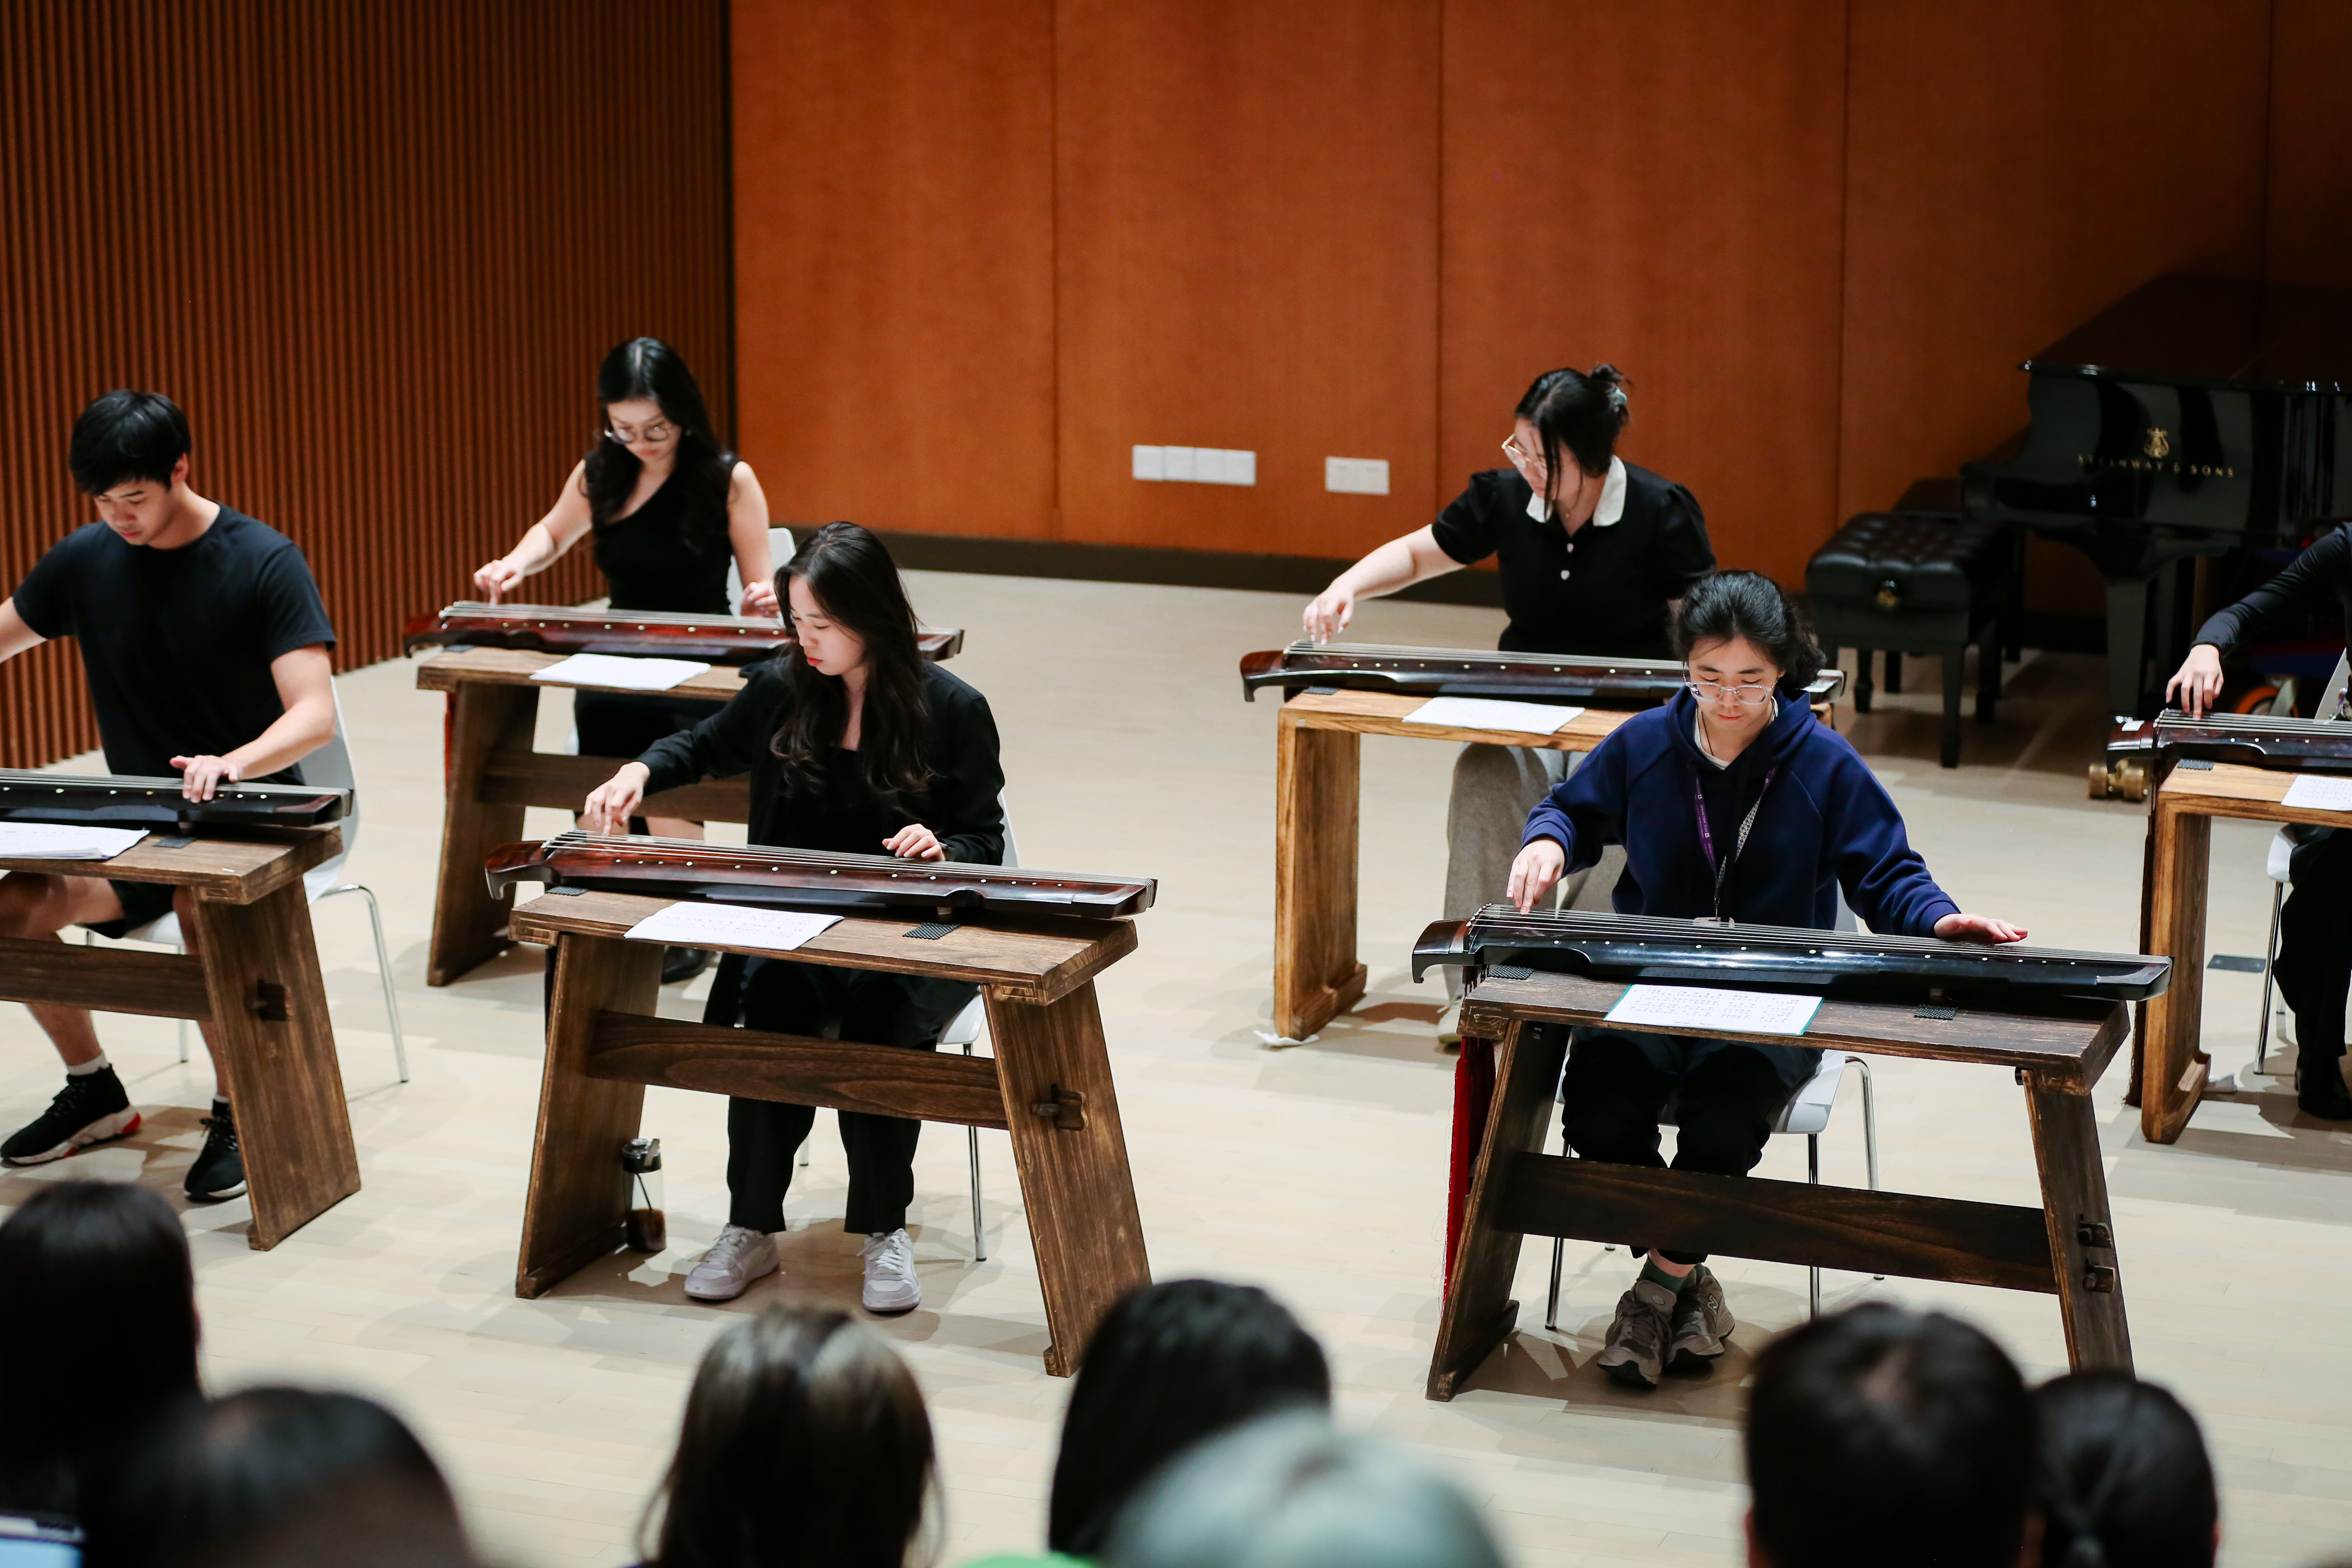 Several students play guqin together